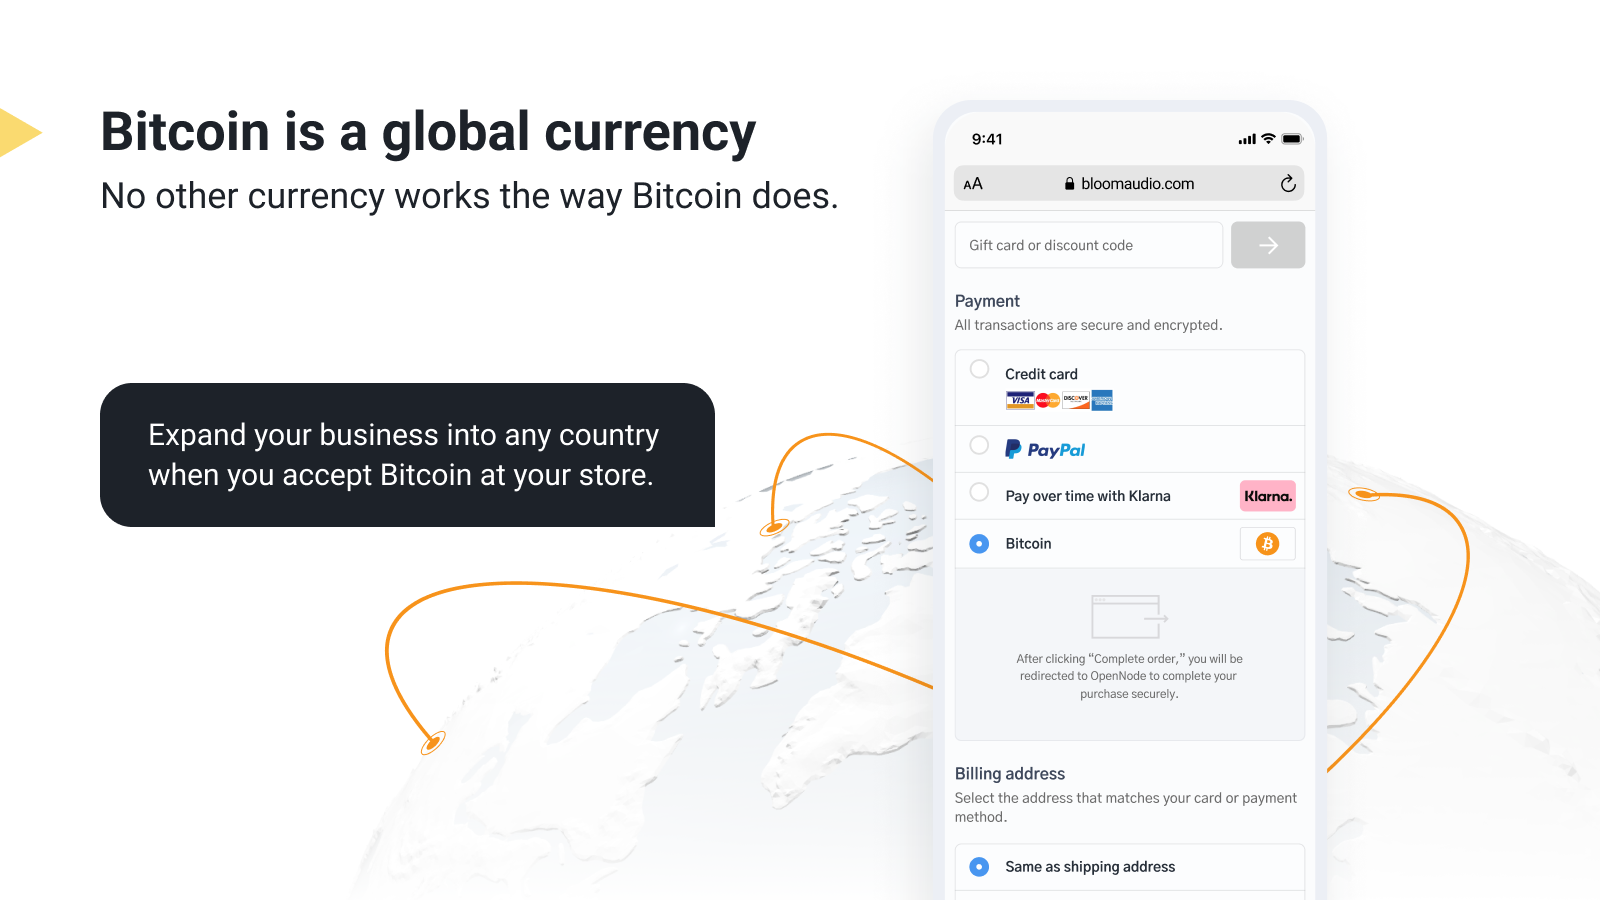 Expand your business into any country when you accept Bitcoin